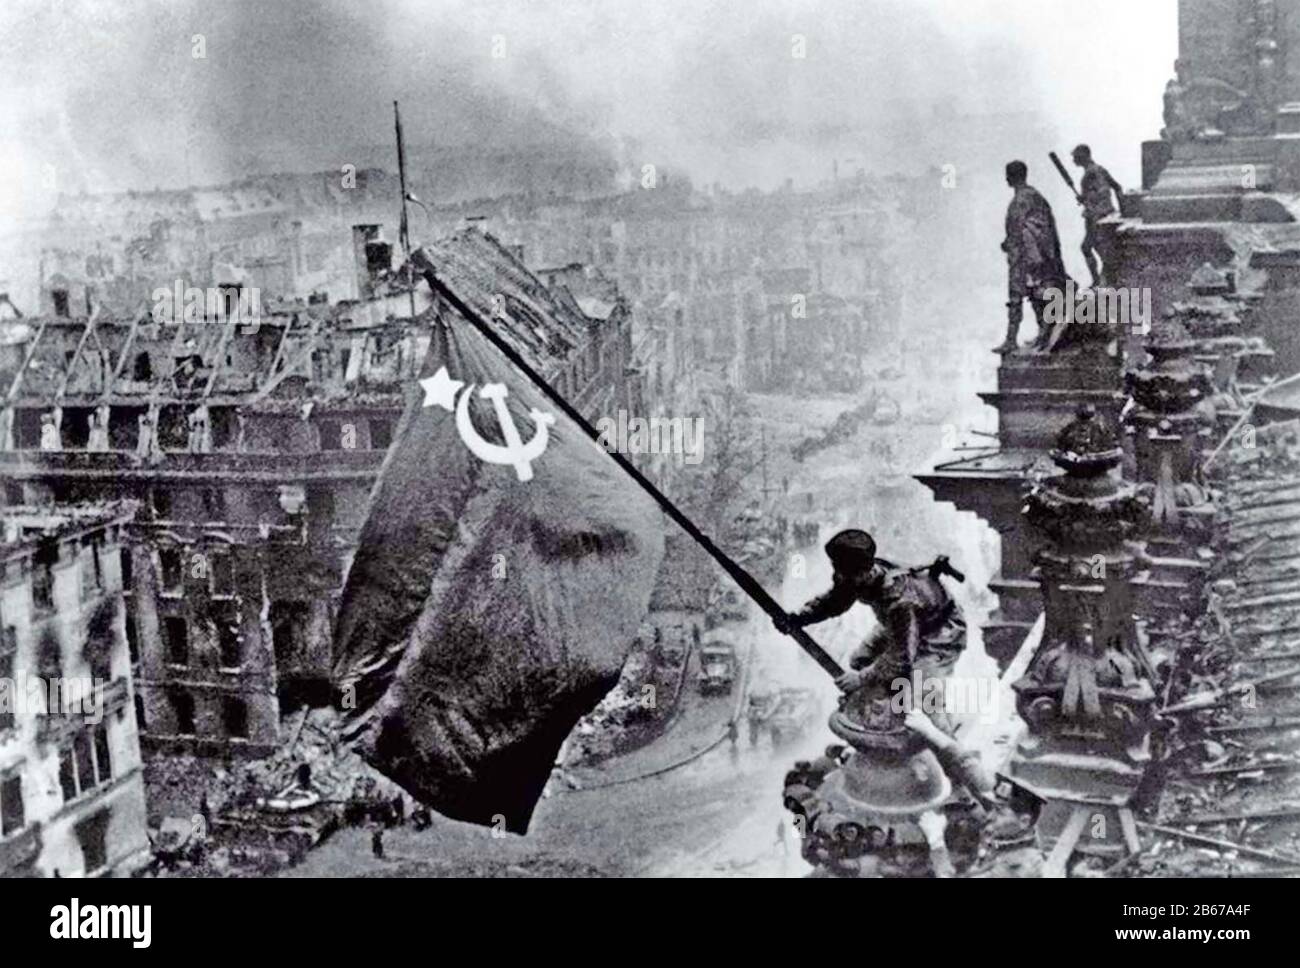 BERLIN 2 May 1945. Red Army soldier flies the Soviet flag from the ruined Reichstag. Photo: Yevgeny Khaldei Stock Photo